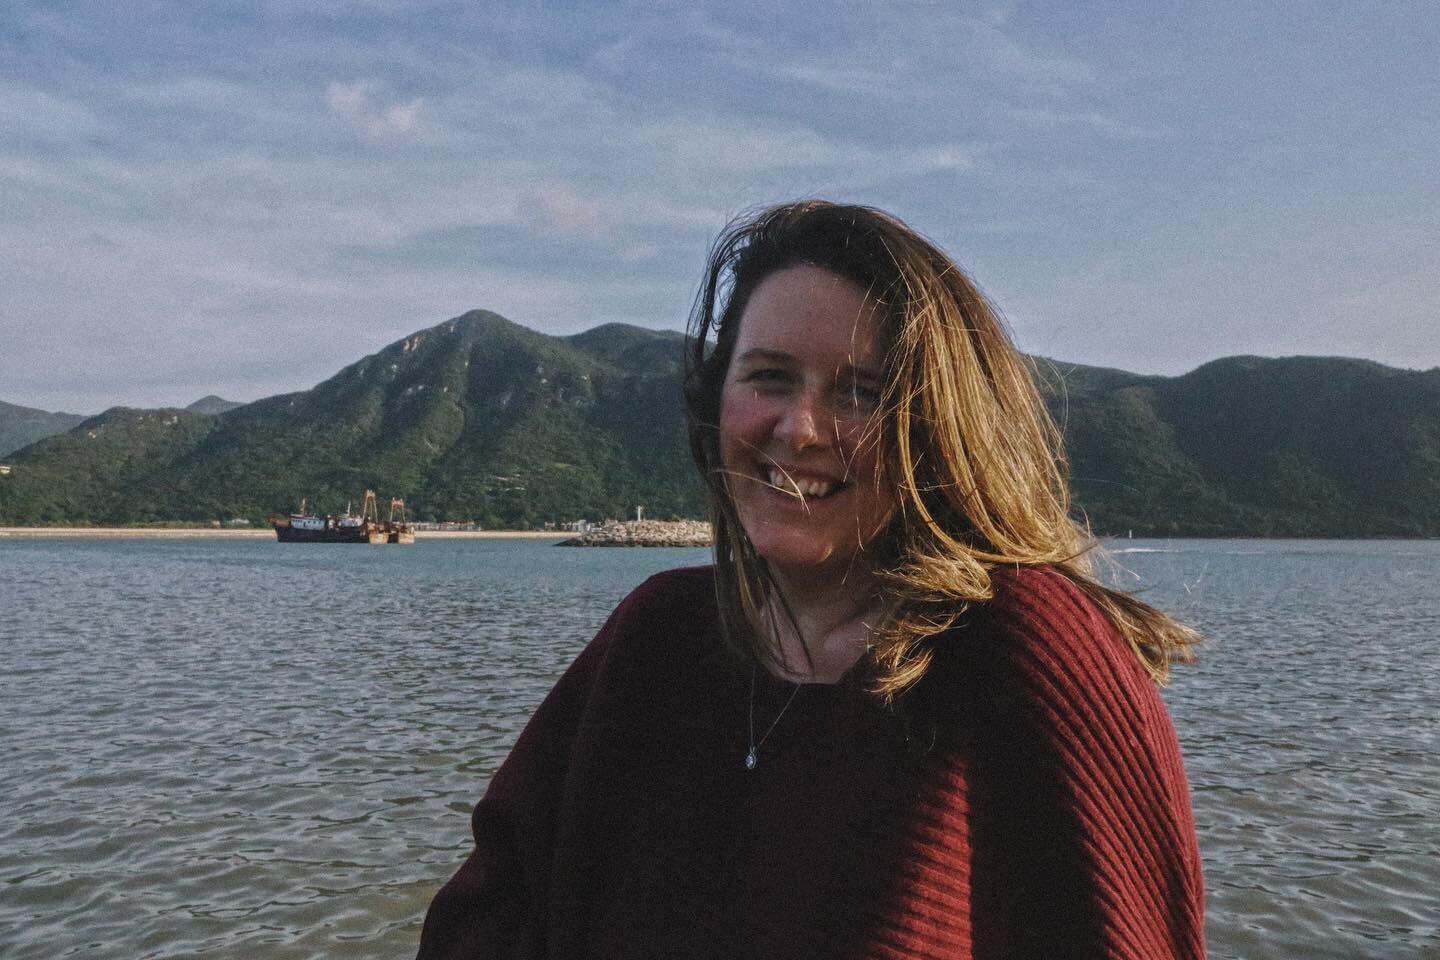 People and Places 🌏 : Michelle, Tai O

&ldquo;If there&rsquo;s one place that reminds me of my home, Halifax, it would be Tai O.

The quietness, the smell of the ocean, and the sight of the fisherman reeling in fish bring me back to the fishing town